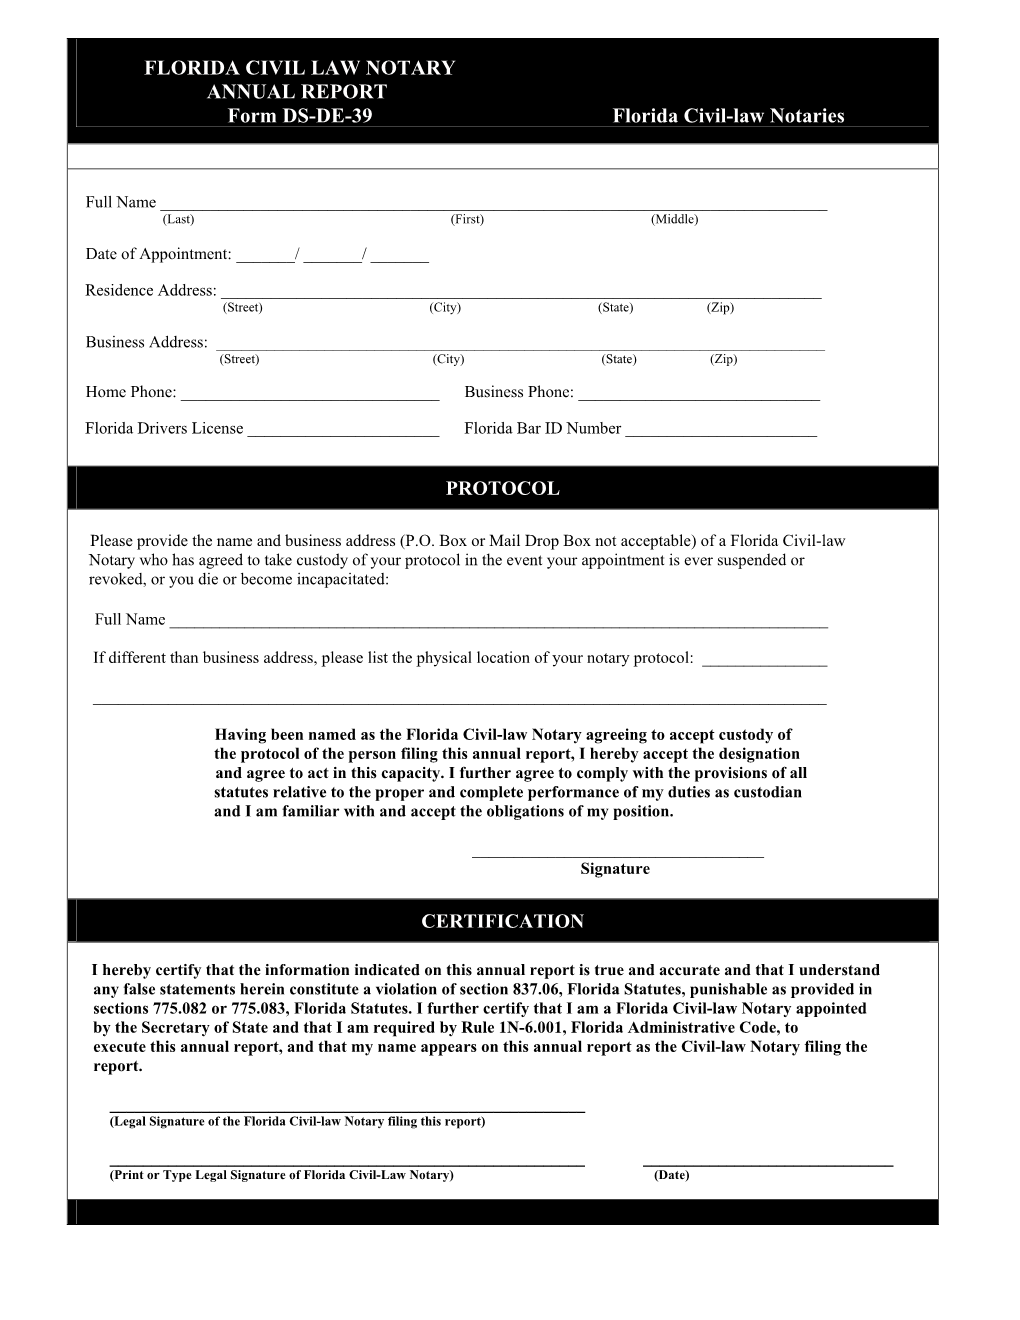 FLORIDA CIVIL LAW NOTARY ANNUAL REPORT Form DS-DE-39 Florida Civil-Law Notaries